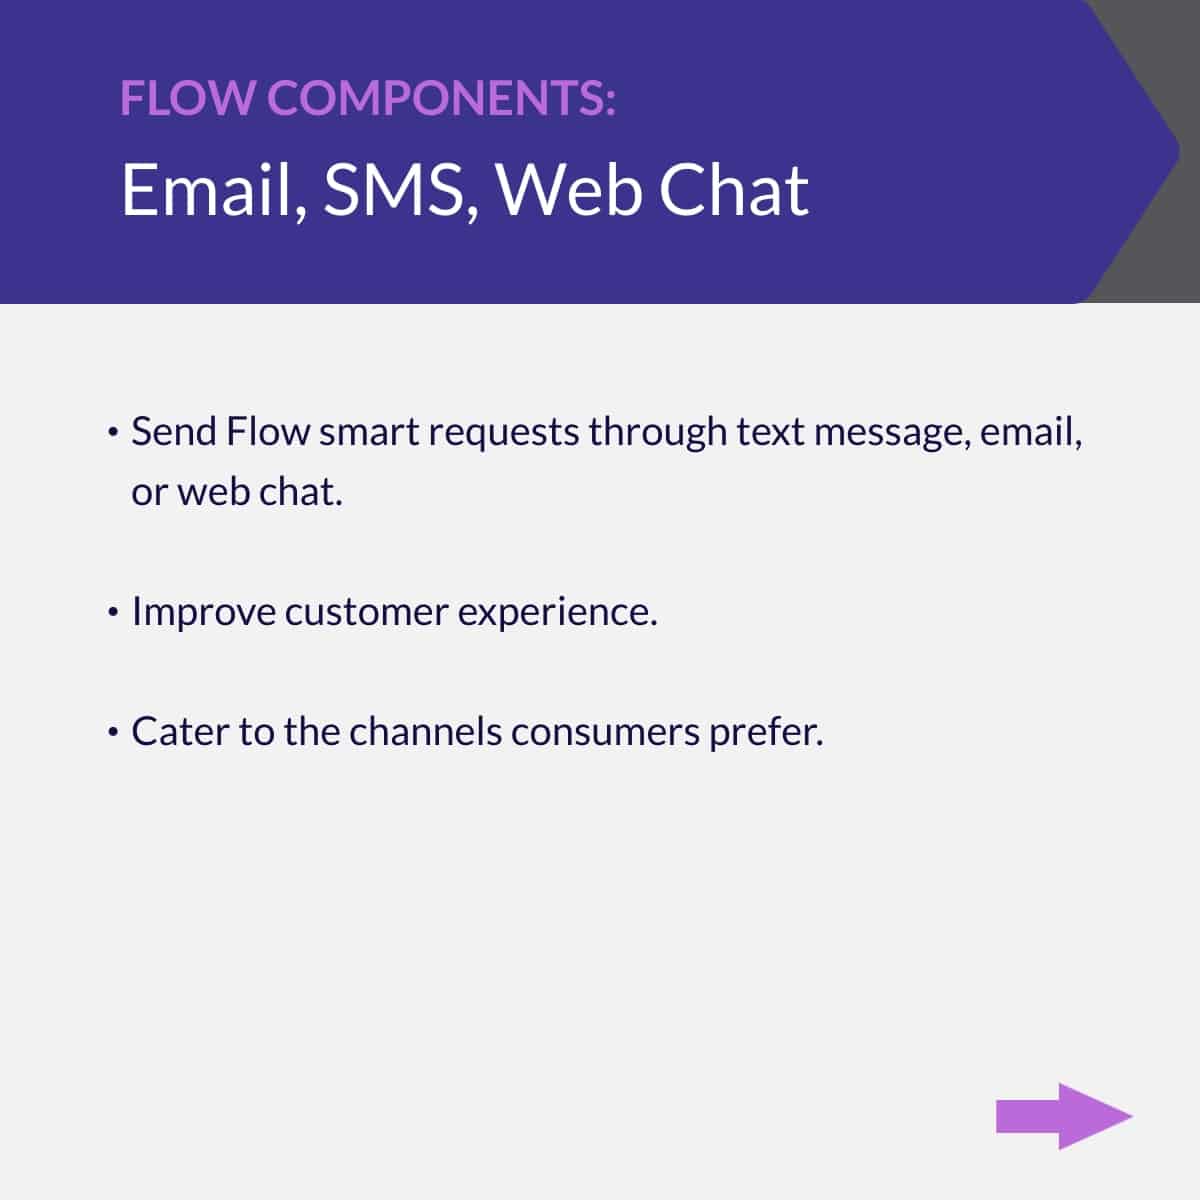 Flow Components - Email, SMS, Web Chat